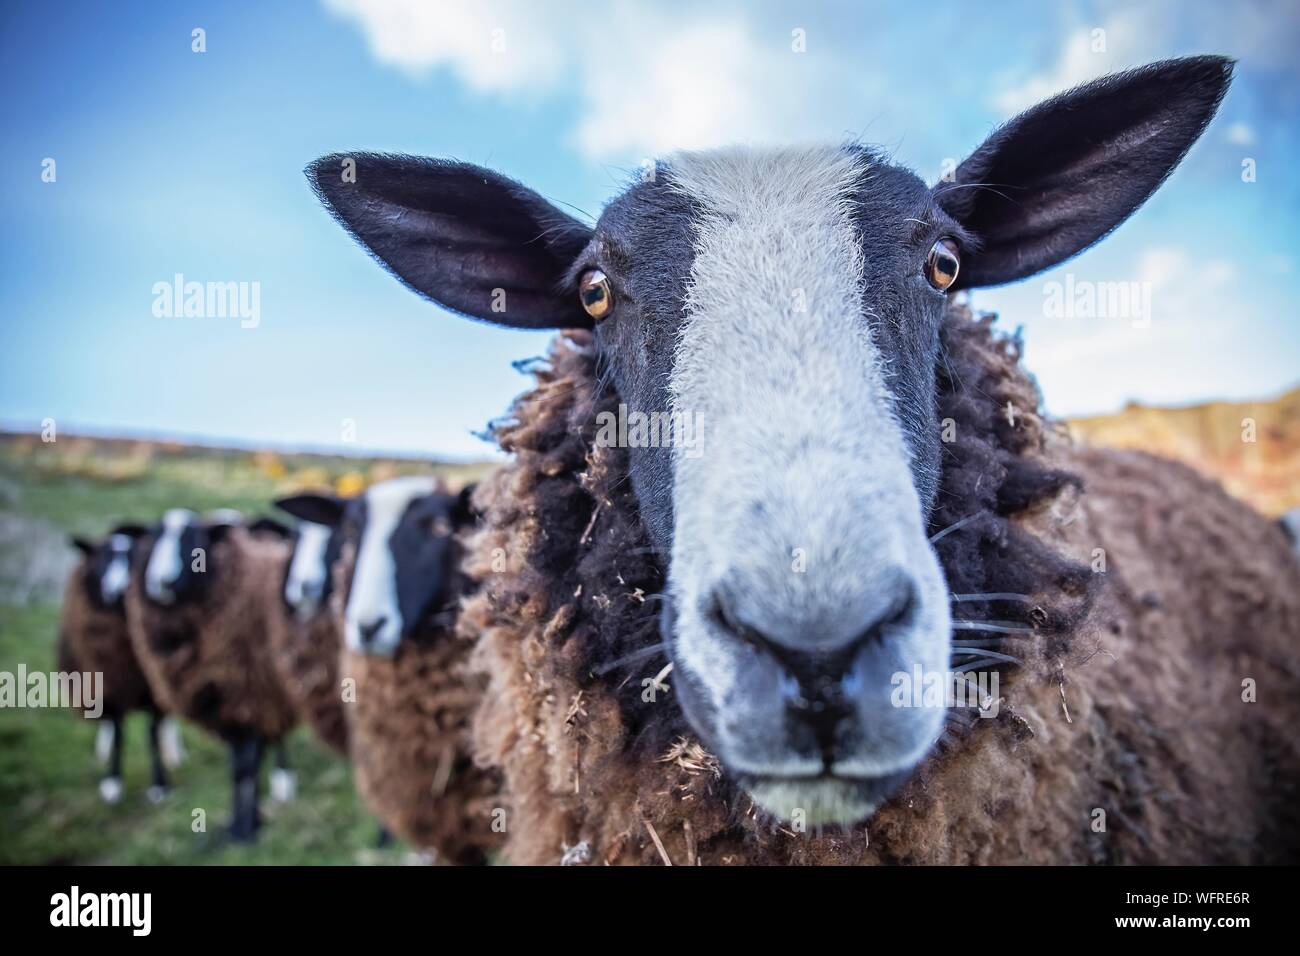 Close-up Portrait Of Sheep On Field Against Sky Stock Photo